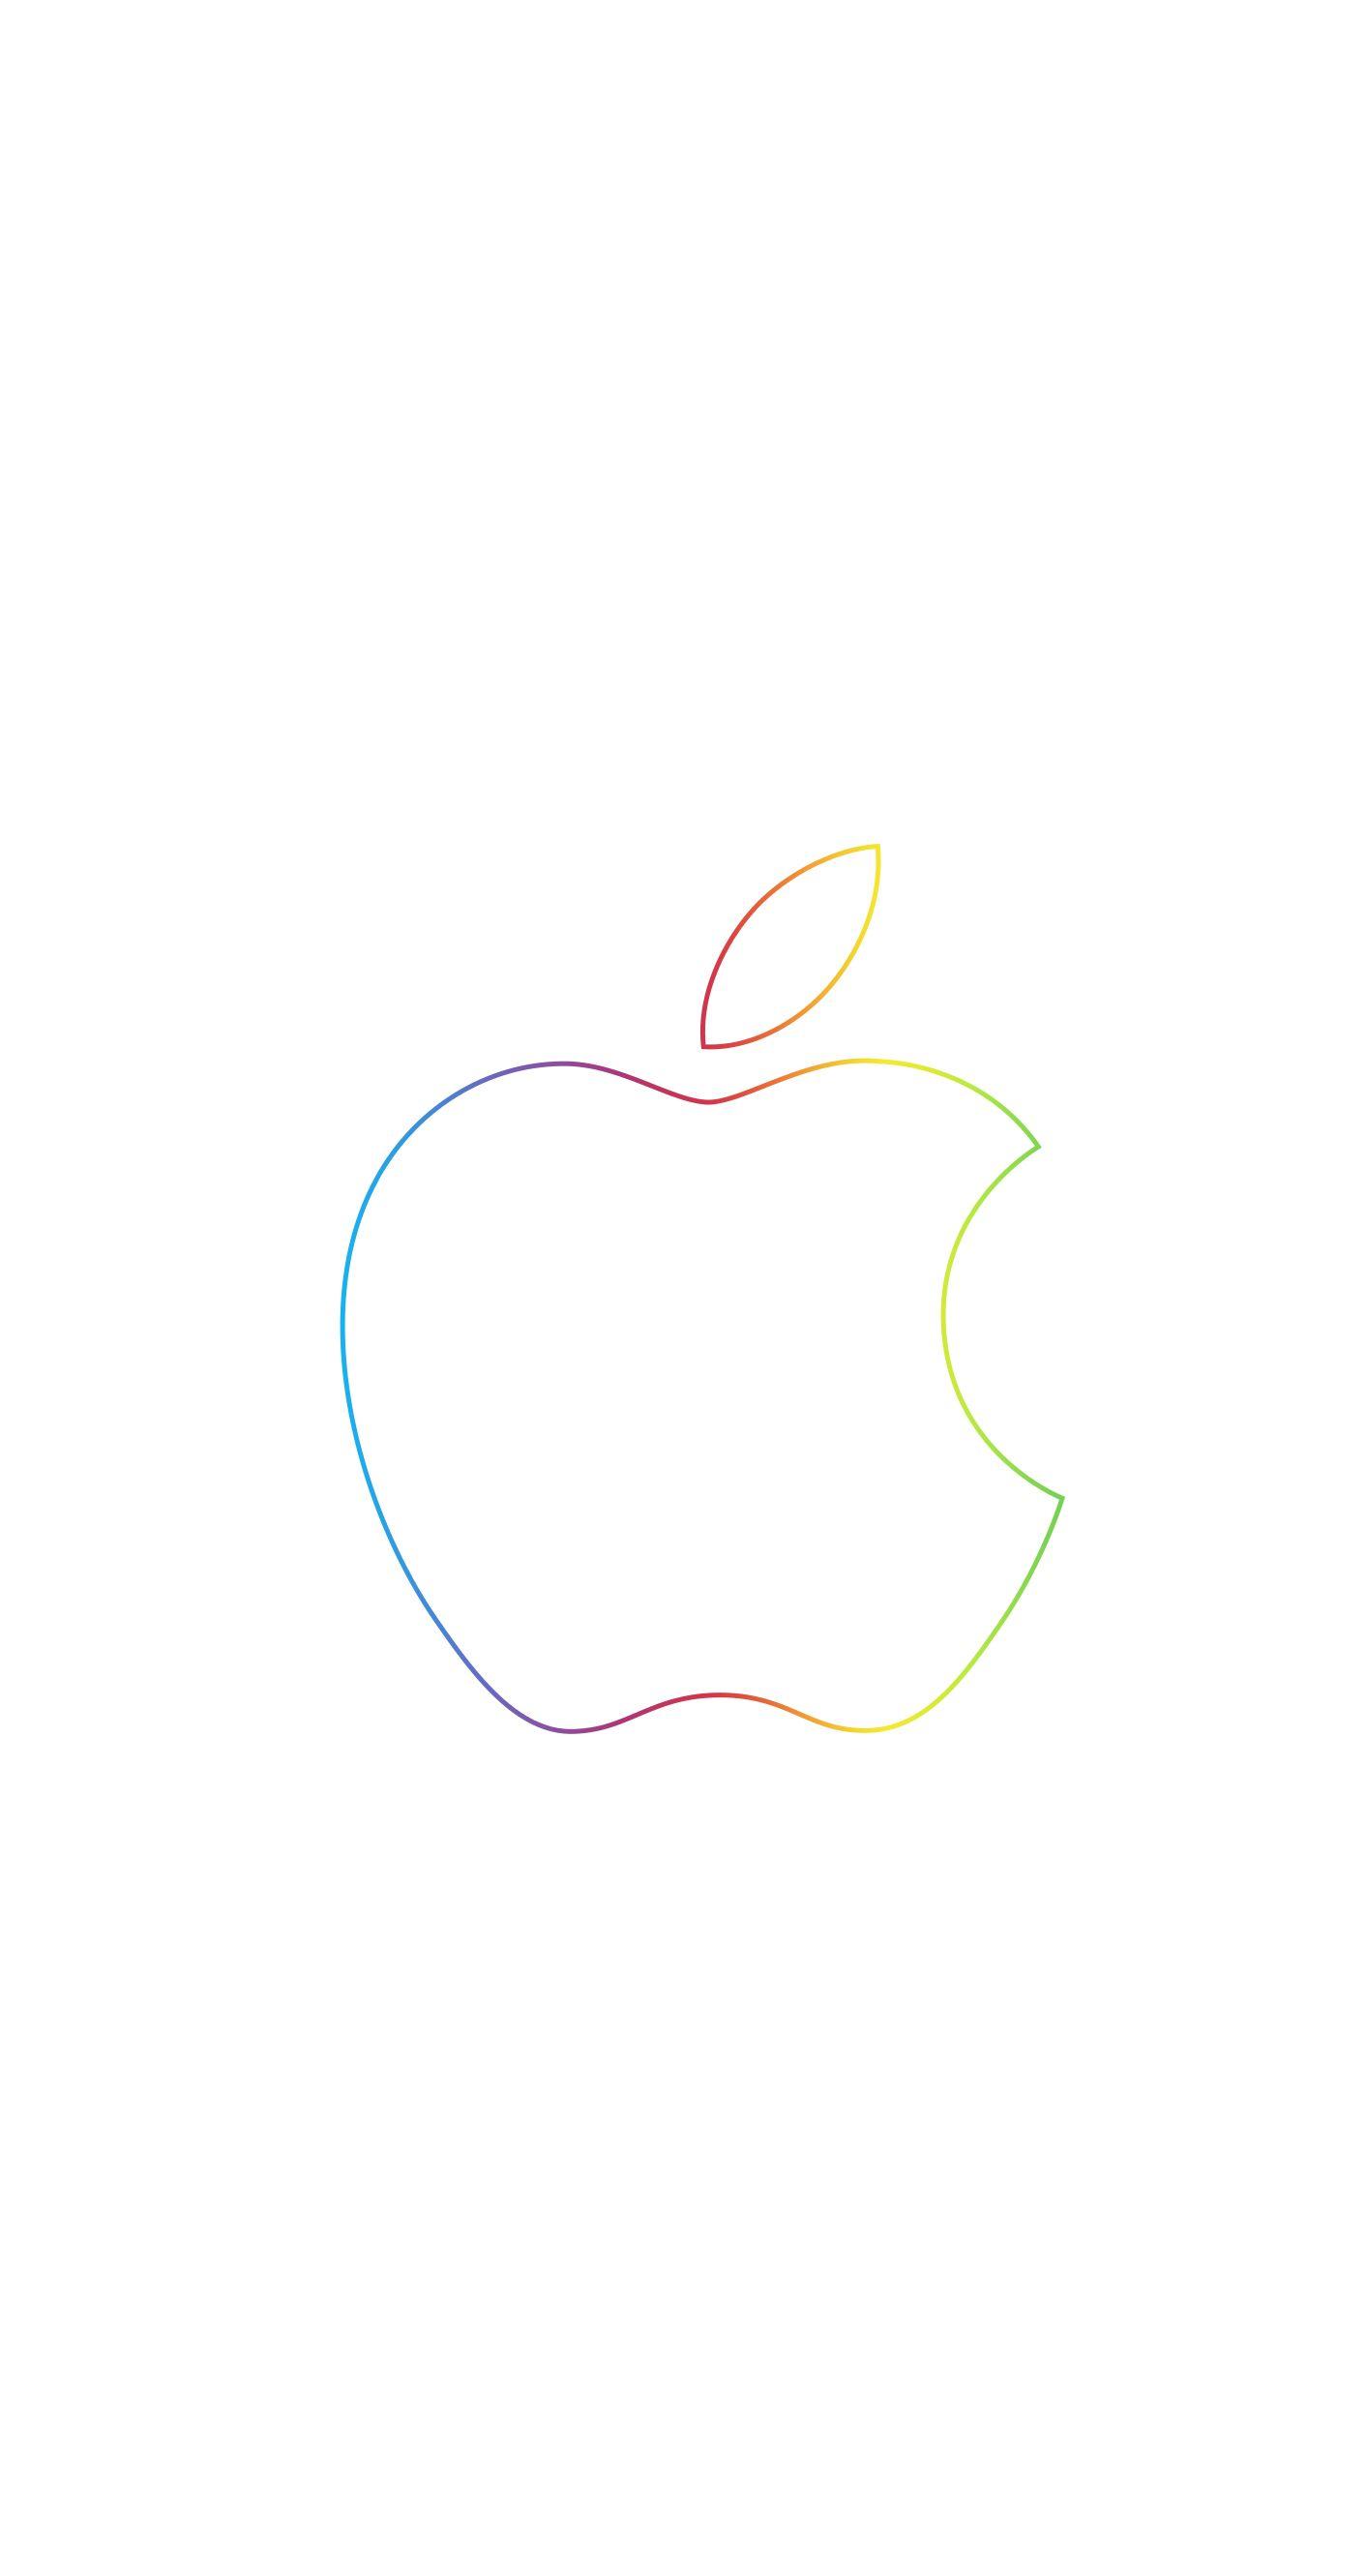 Apple Logo / Find more #Minimalistic #iPhone + #Android